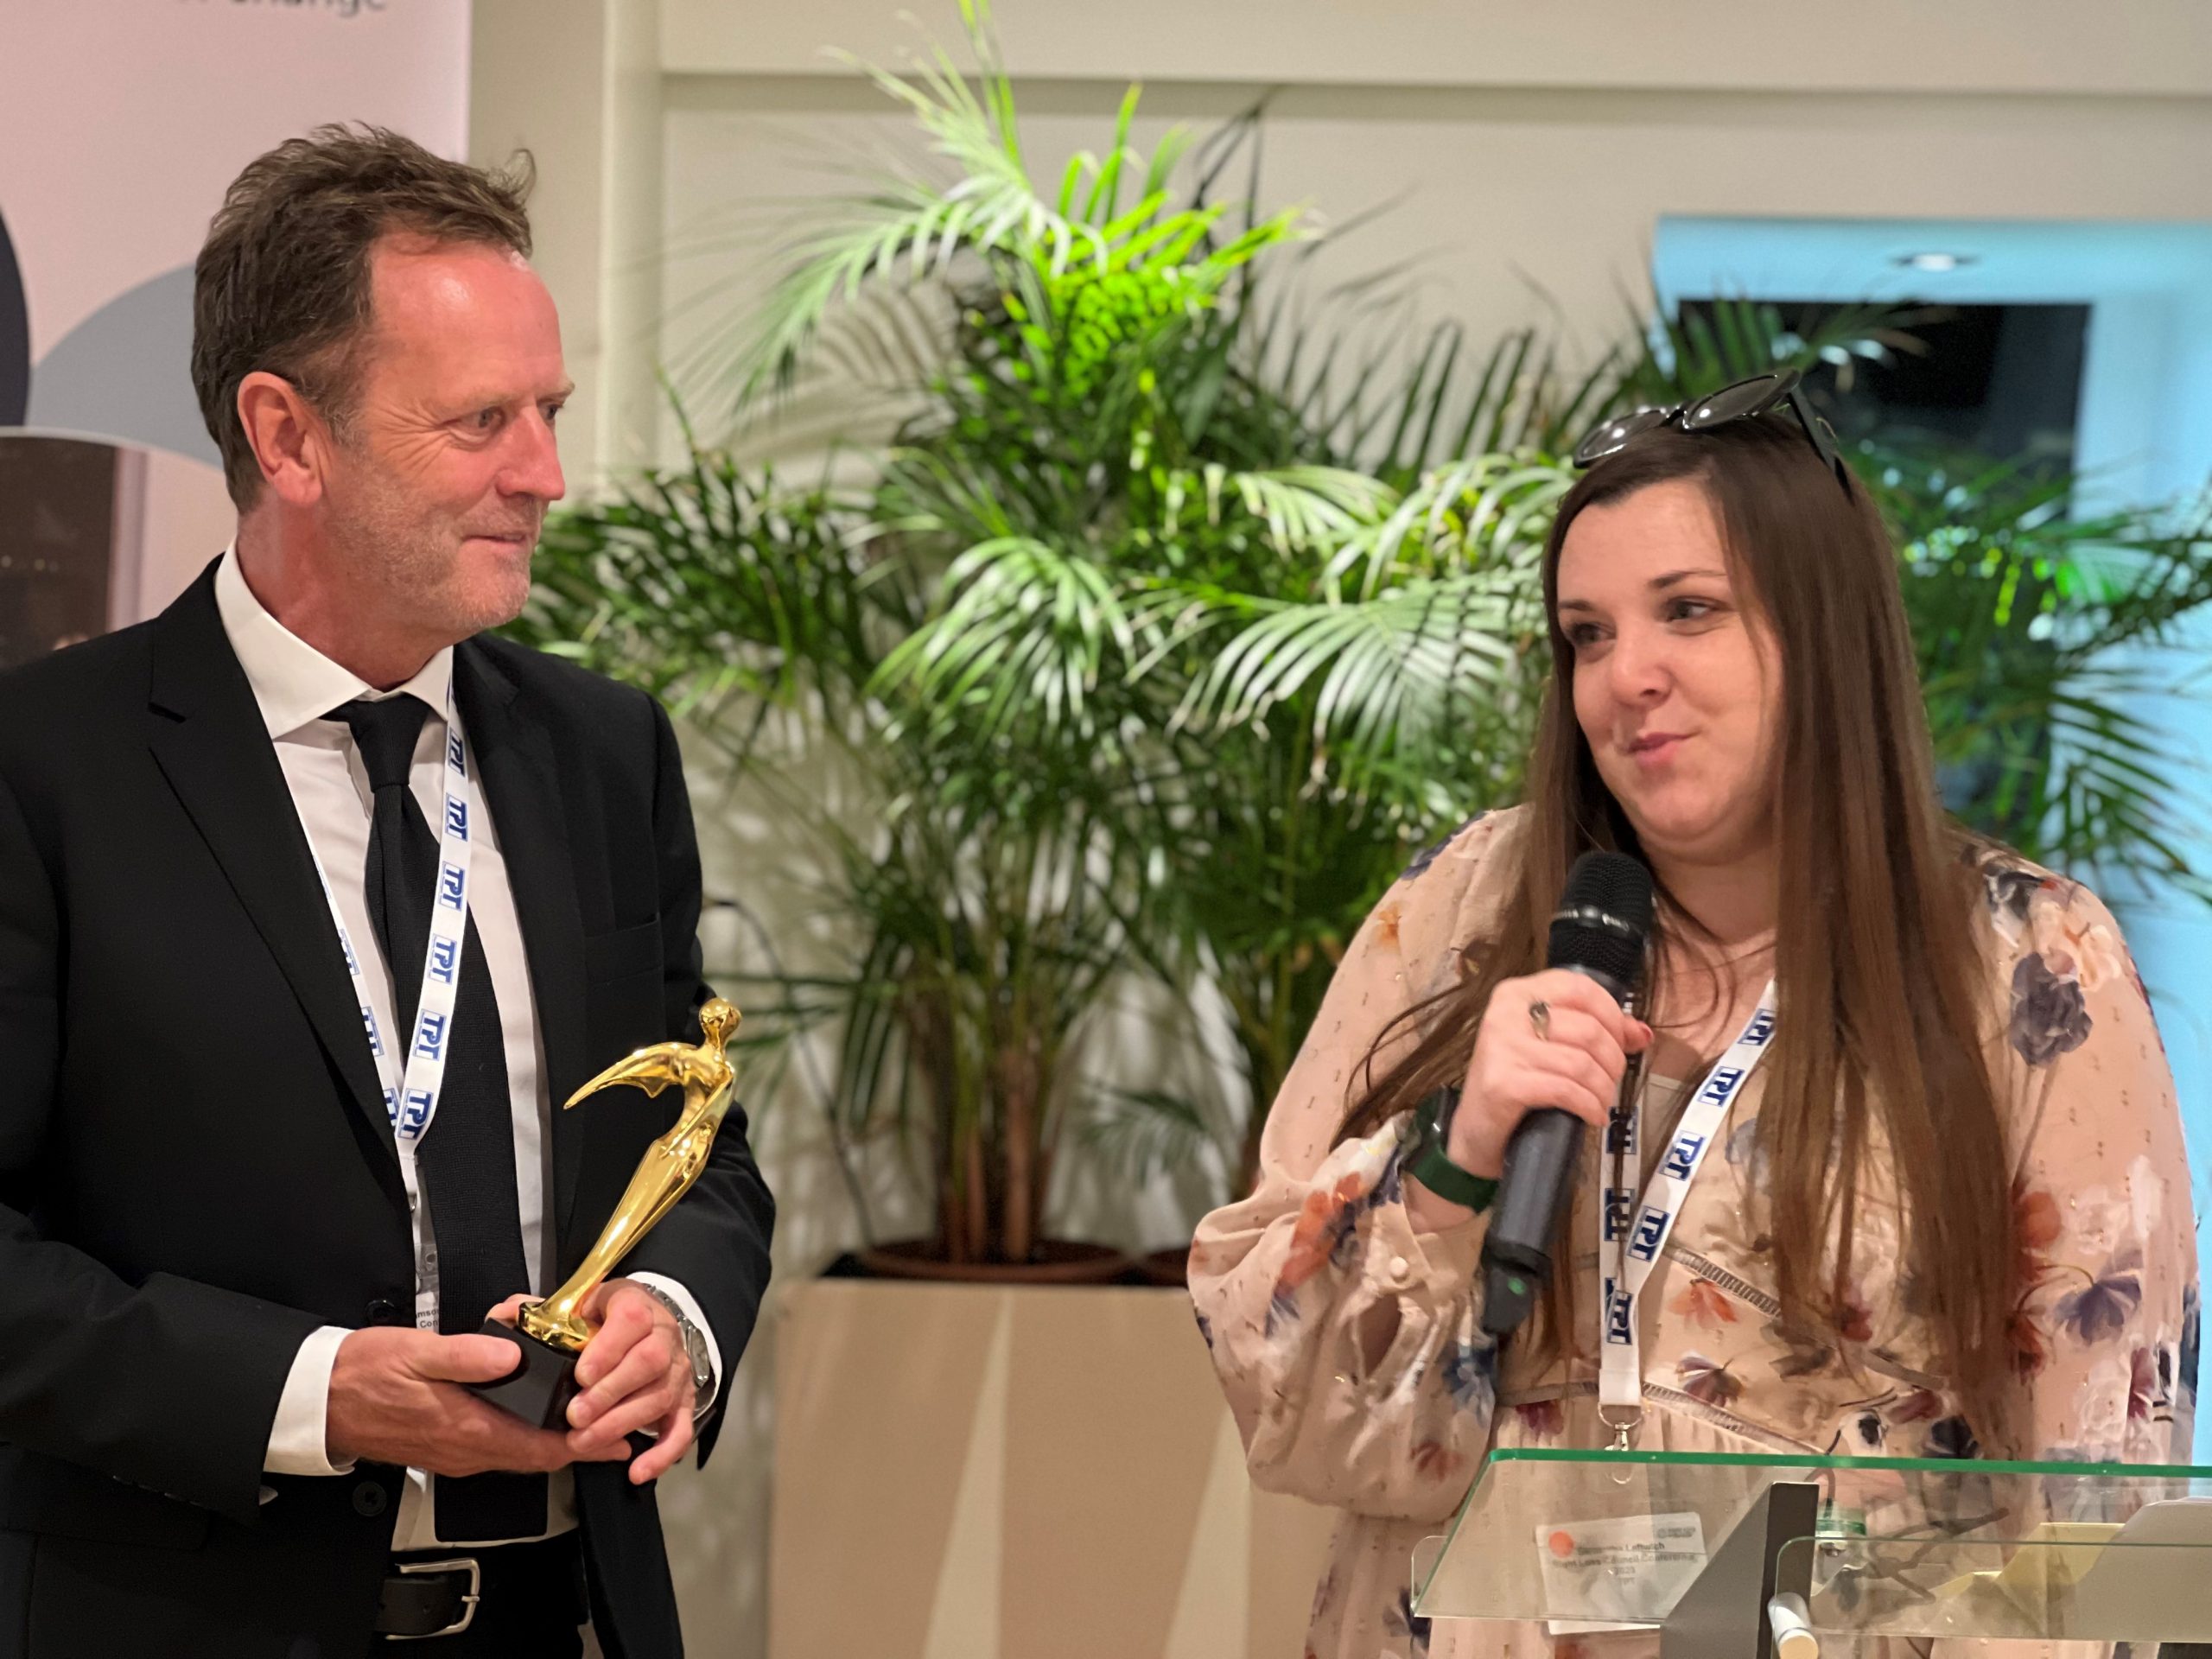 Mervyn Williamson, Trustee at TPT, pictured with Samantha Leftwich, Engagement Manager for East England. Sam is speaking into a microphone, accepting the Outstanding Contribution award on behalf of Sam Fox, Essex SLC member.